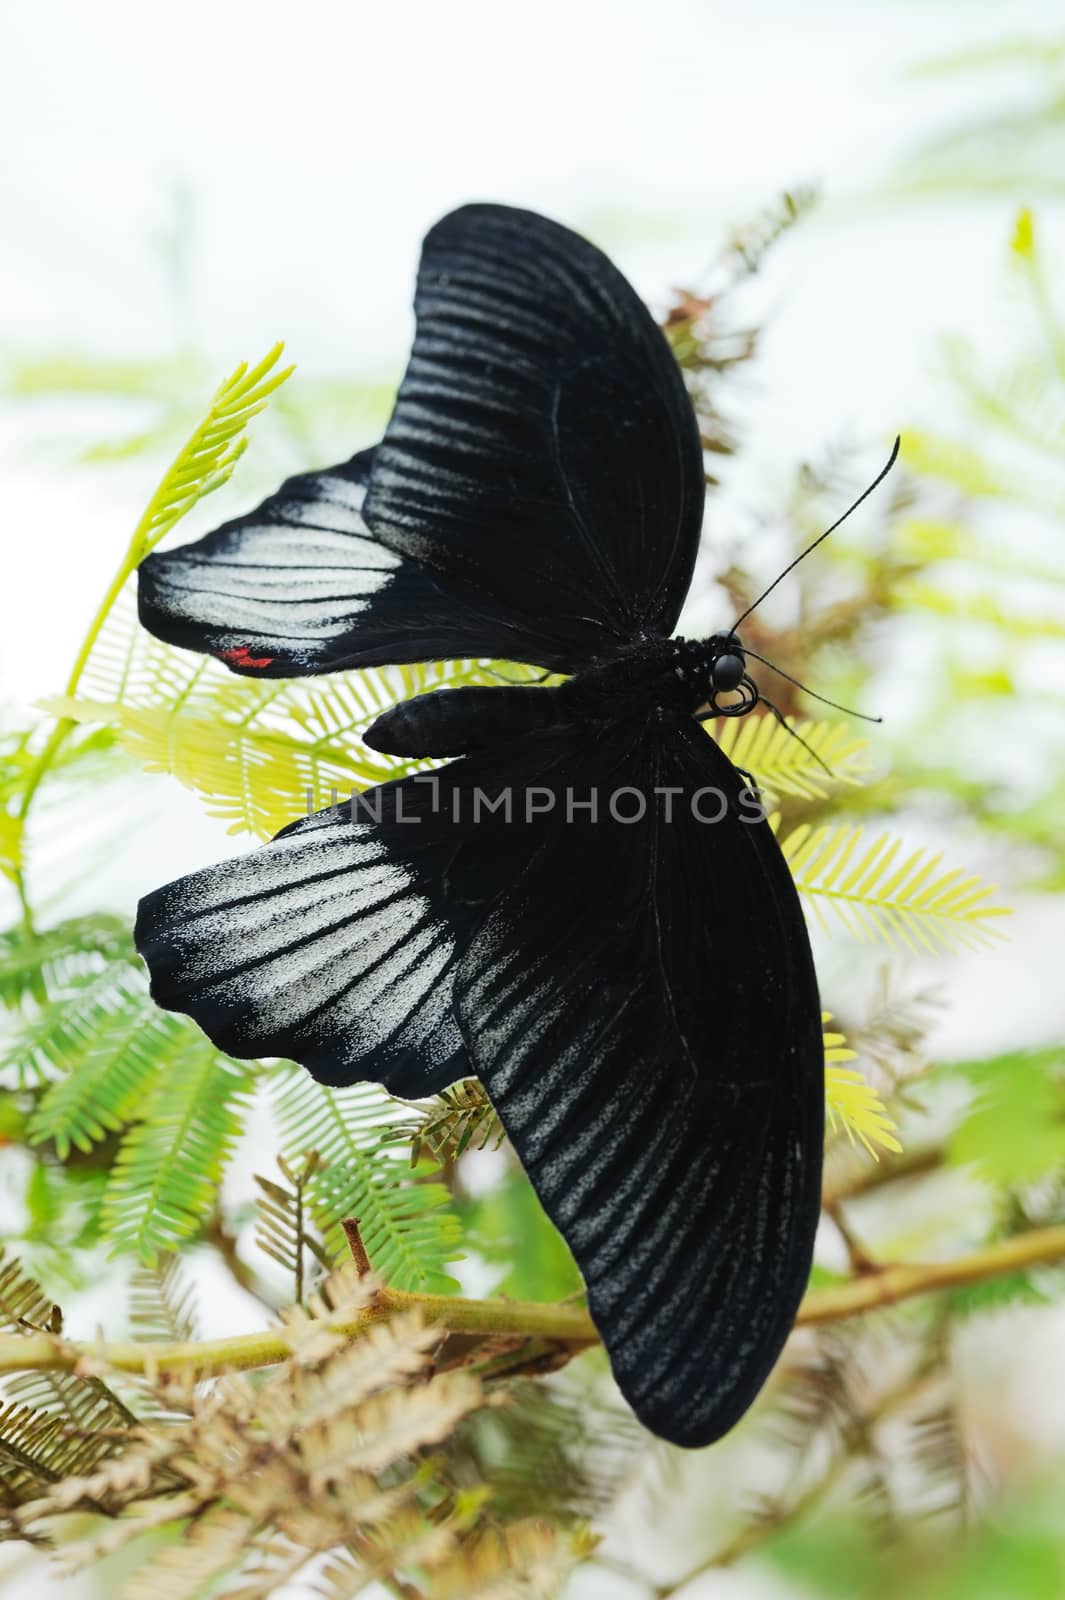 Scarlet swallowtail butterfly on a plant